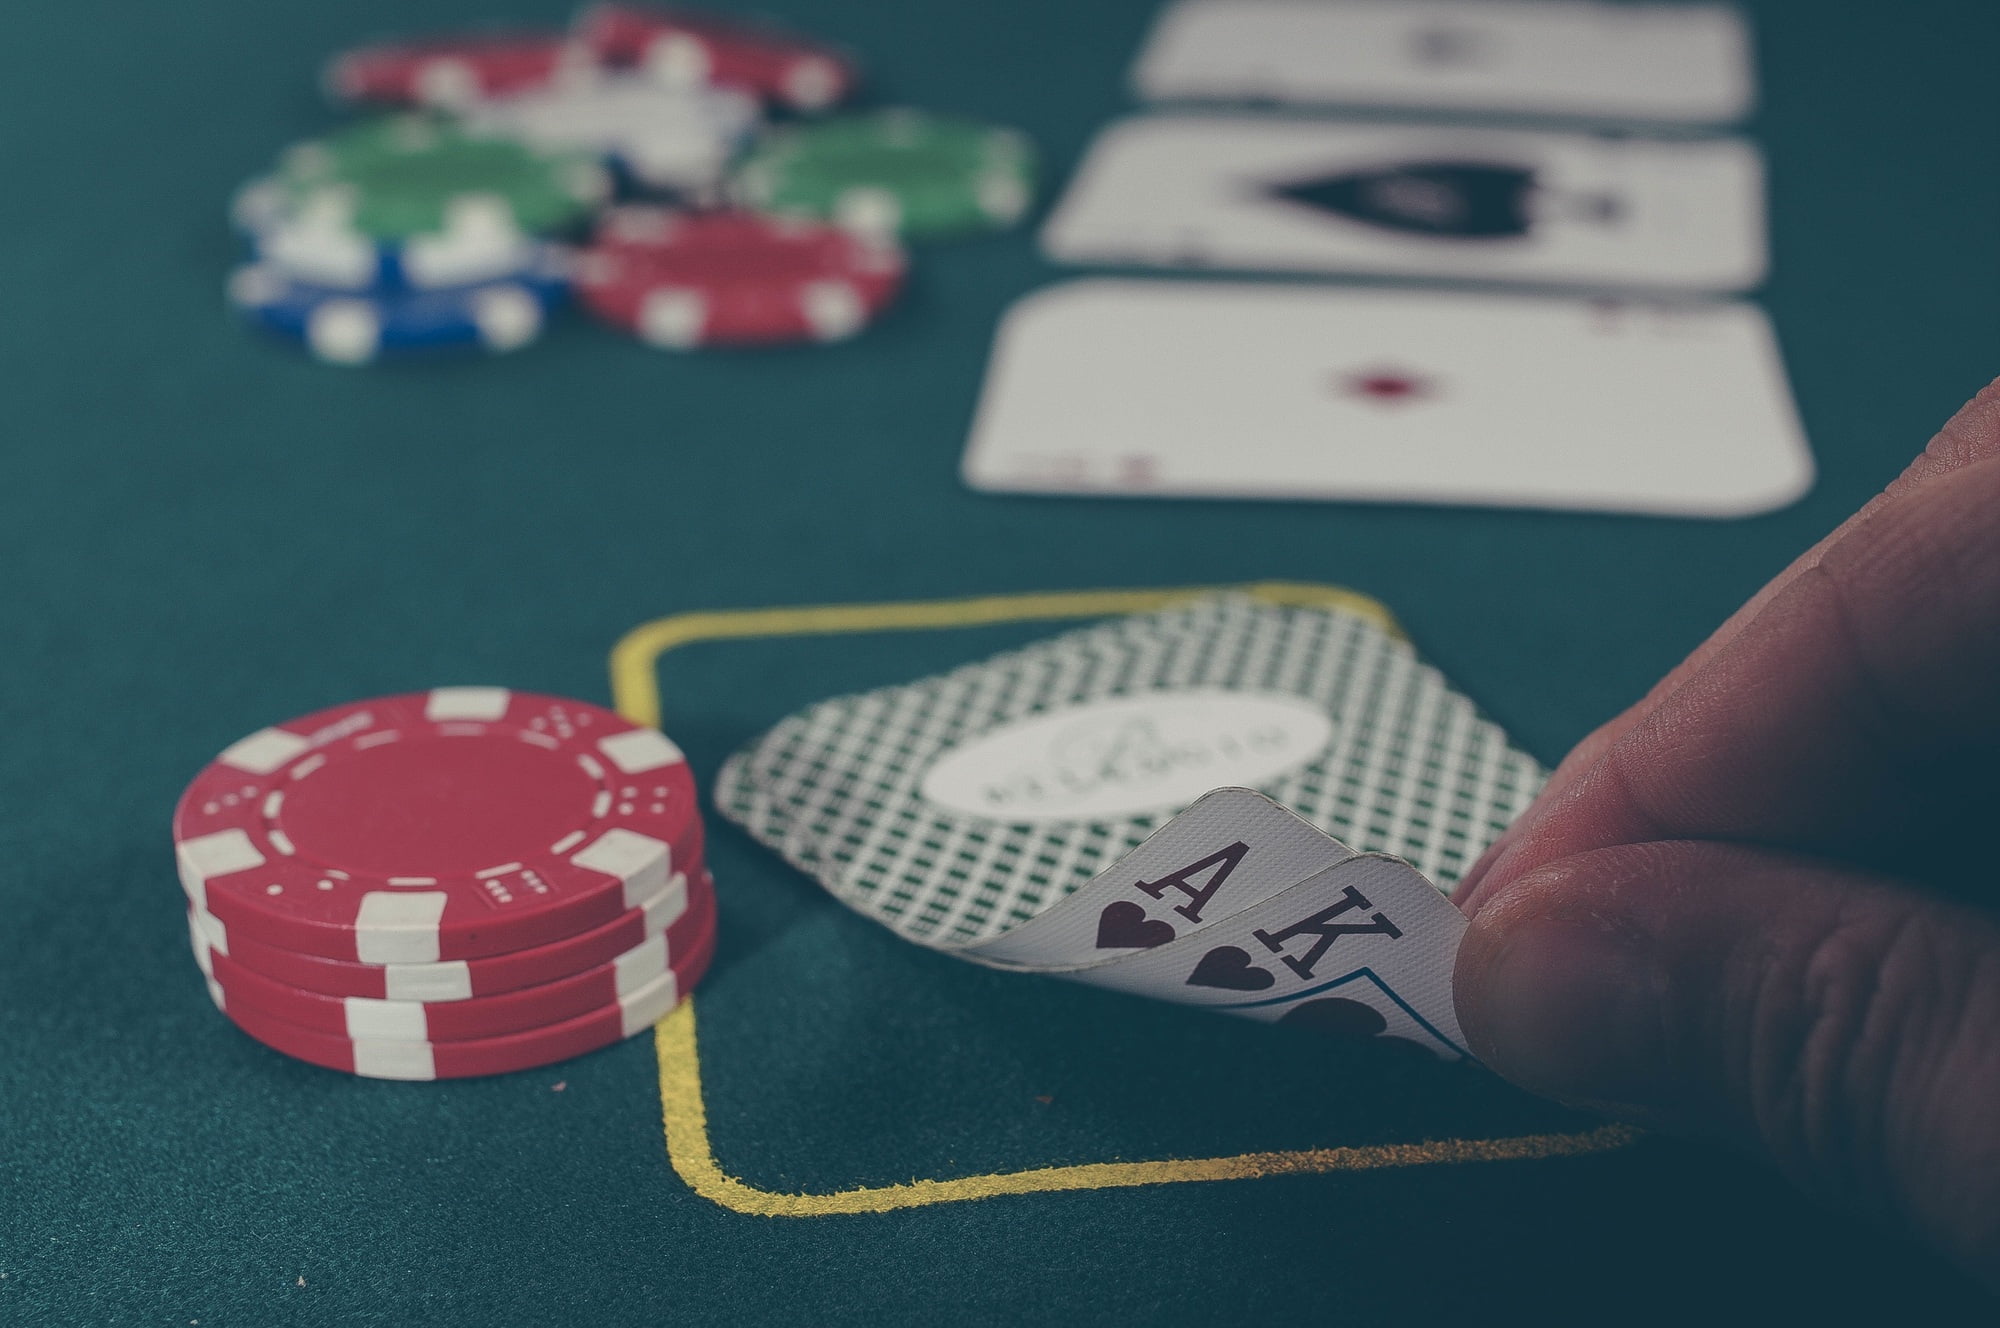 Keep reading if you've never played blackjack because you don't know the rules. This article covers all the rules and will have you playing like a pro today.